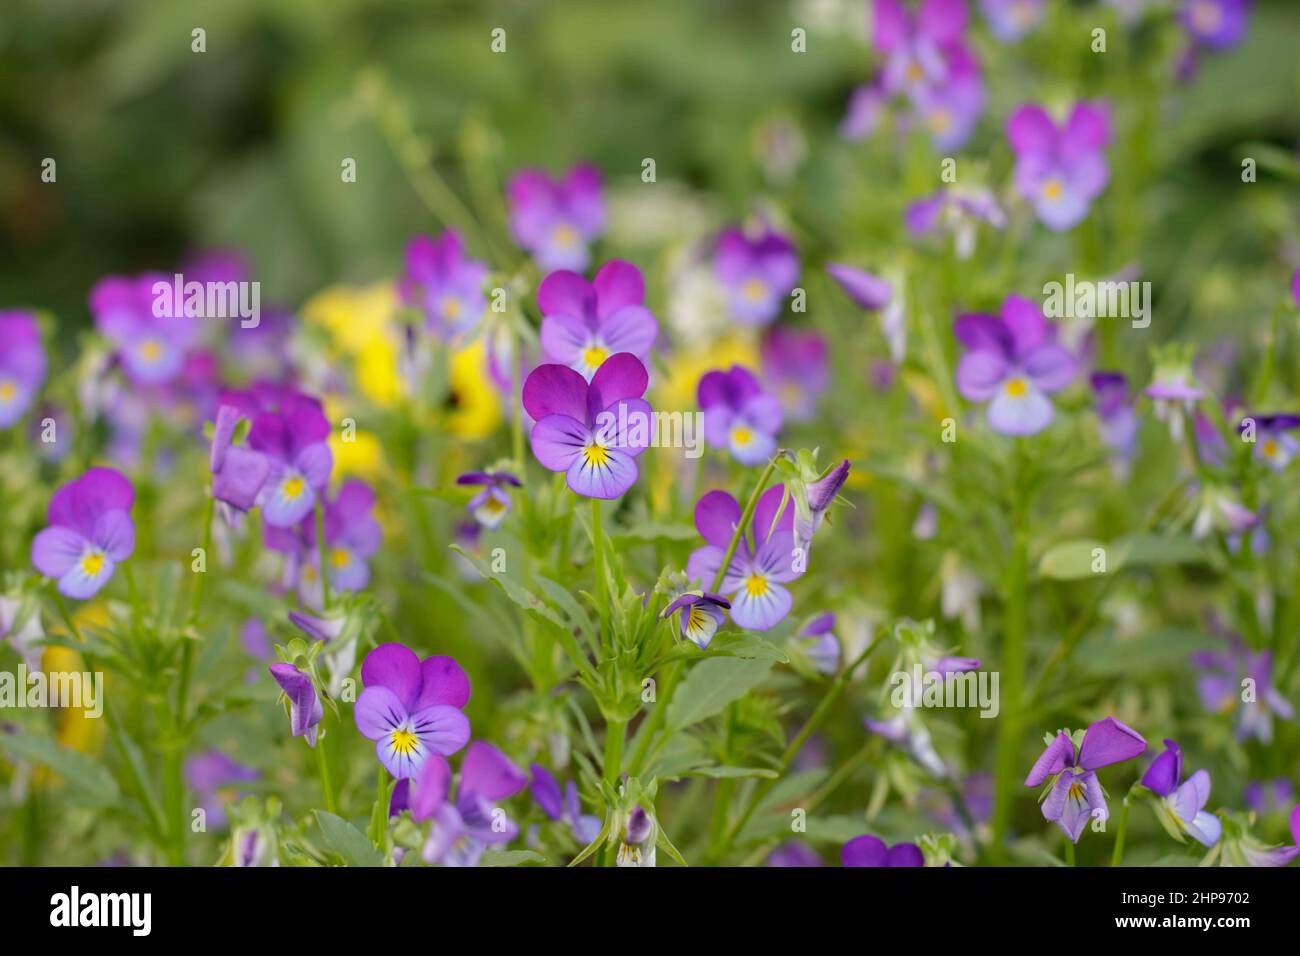 Wild pansies, viola tricolor, also known as johnny jump up. Stock Photo